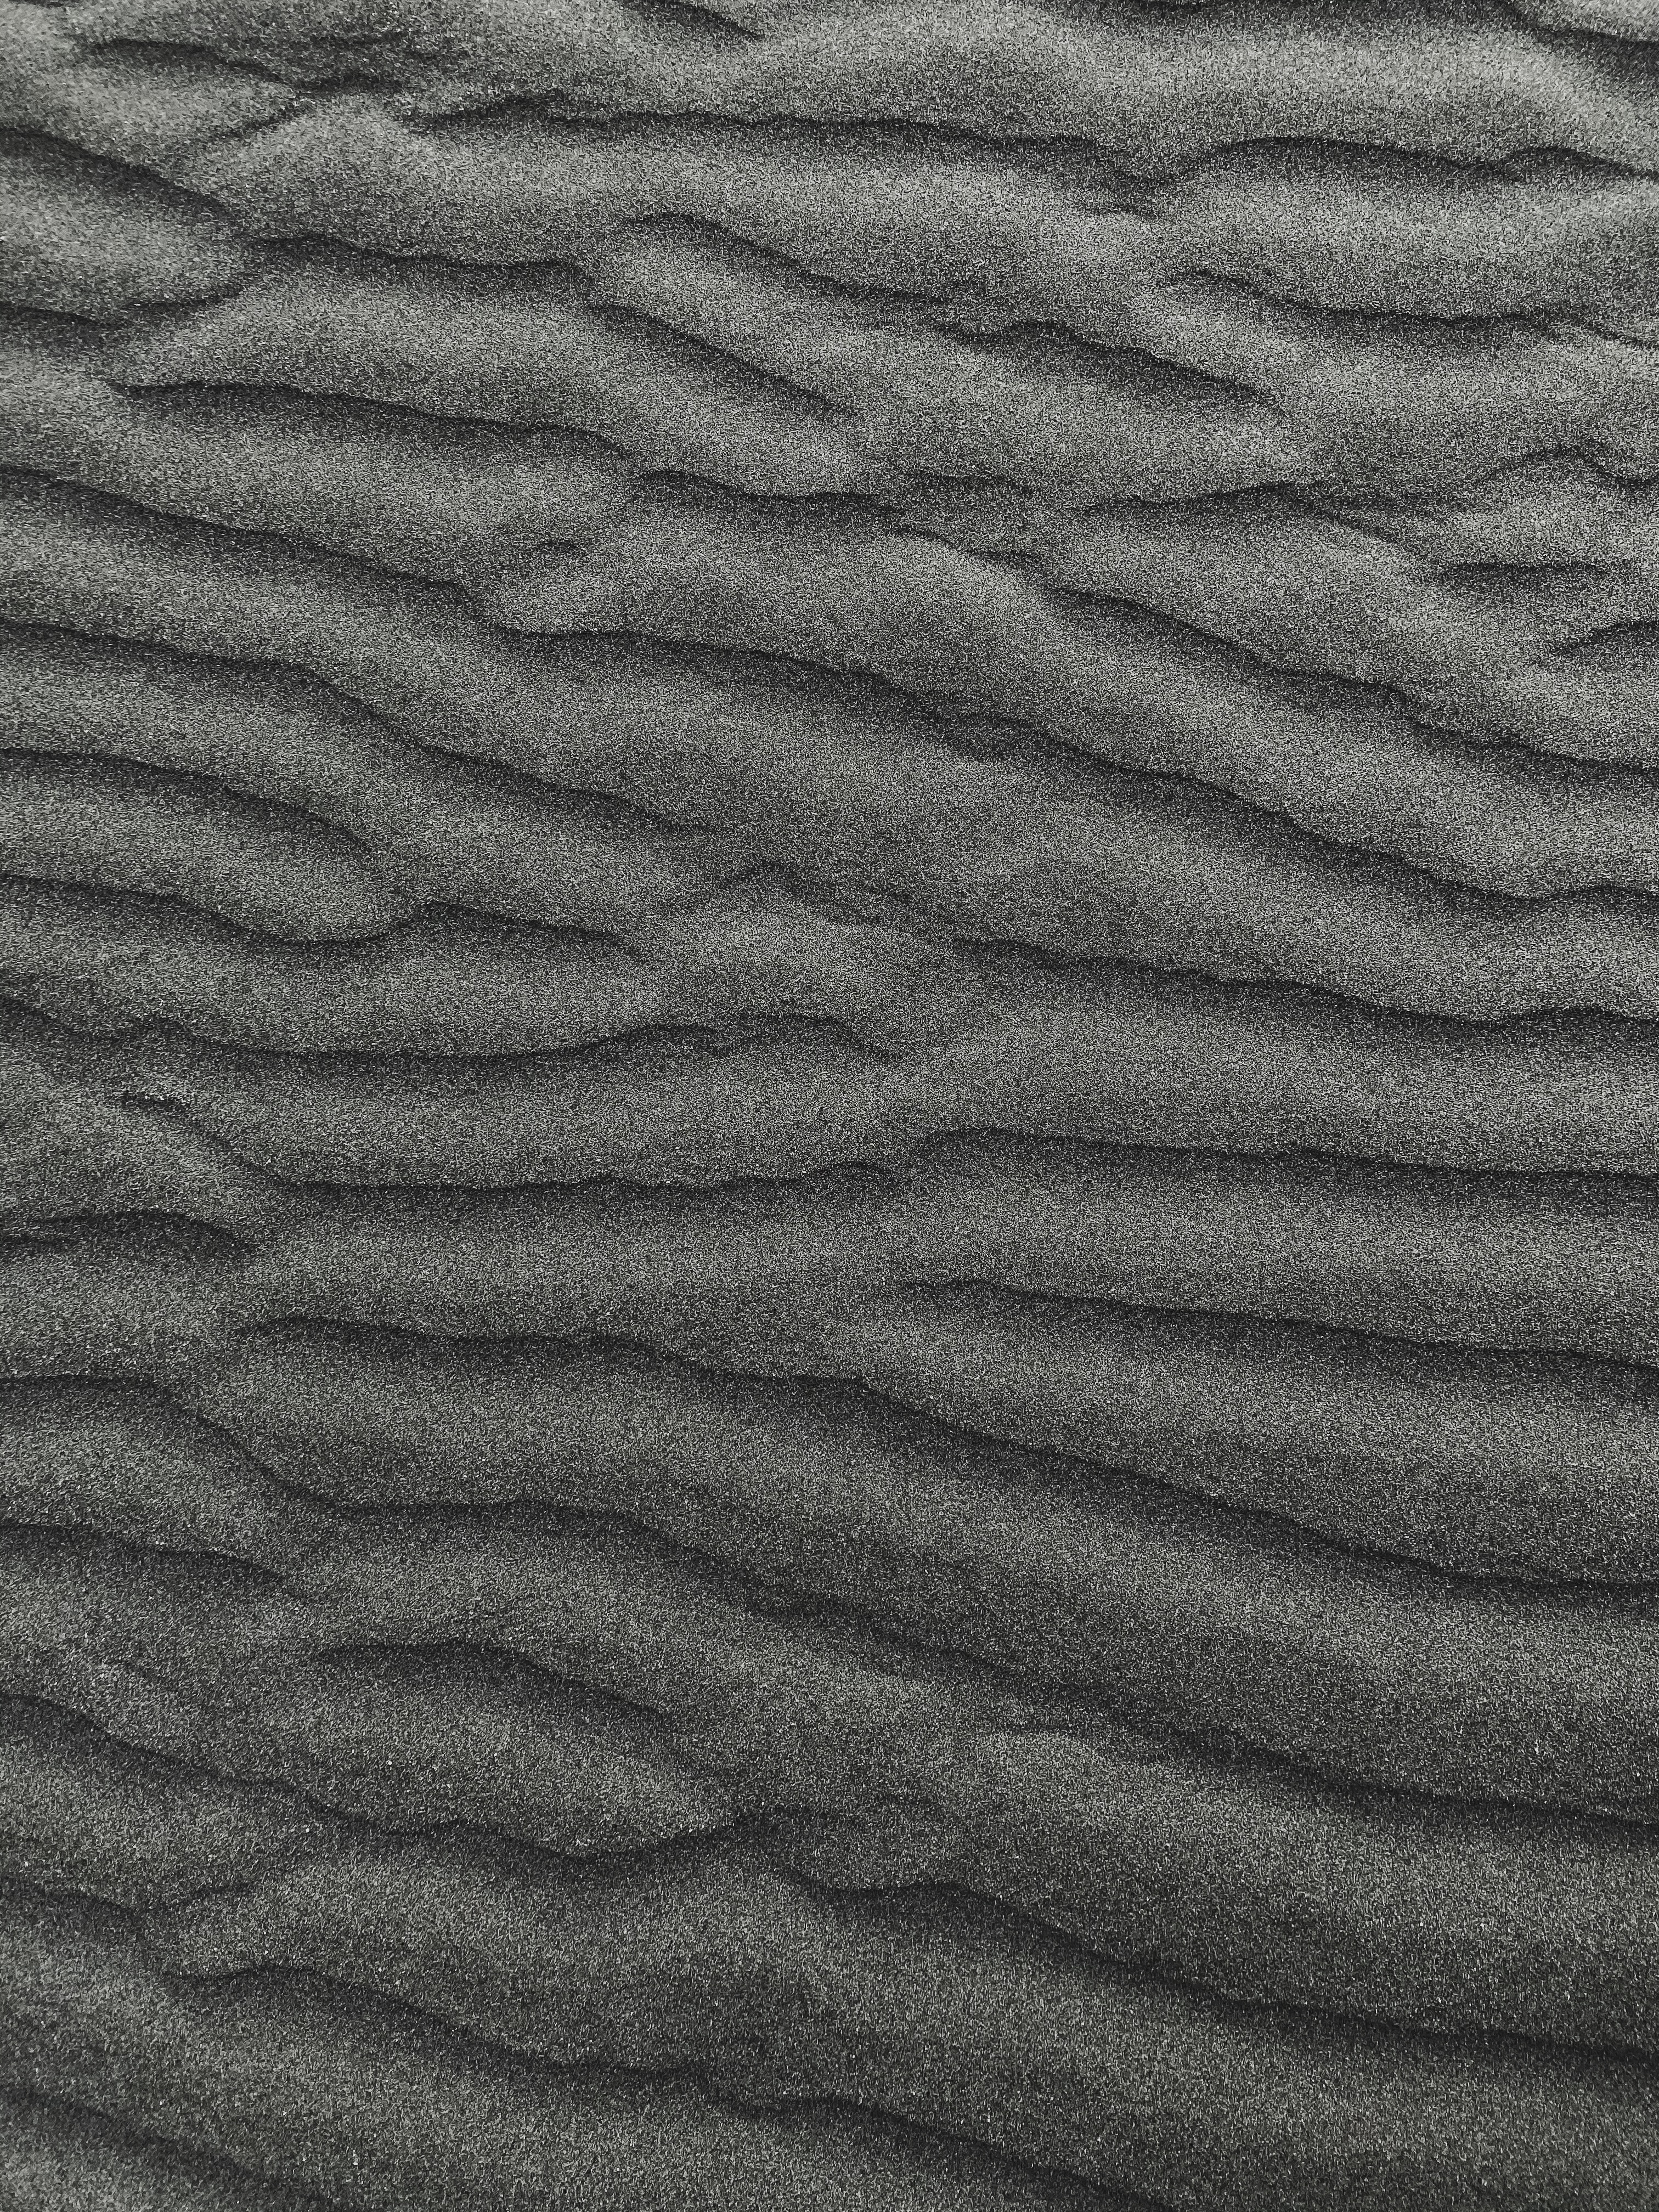 textures, wavy, sand, texture, grey High Definition image